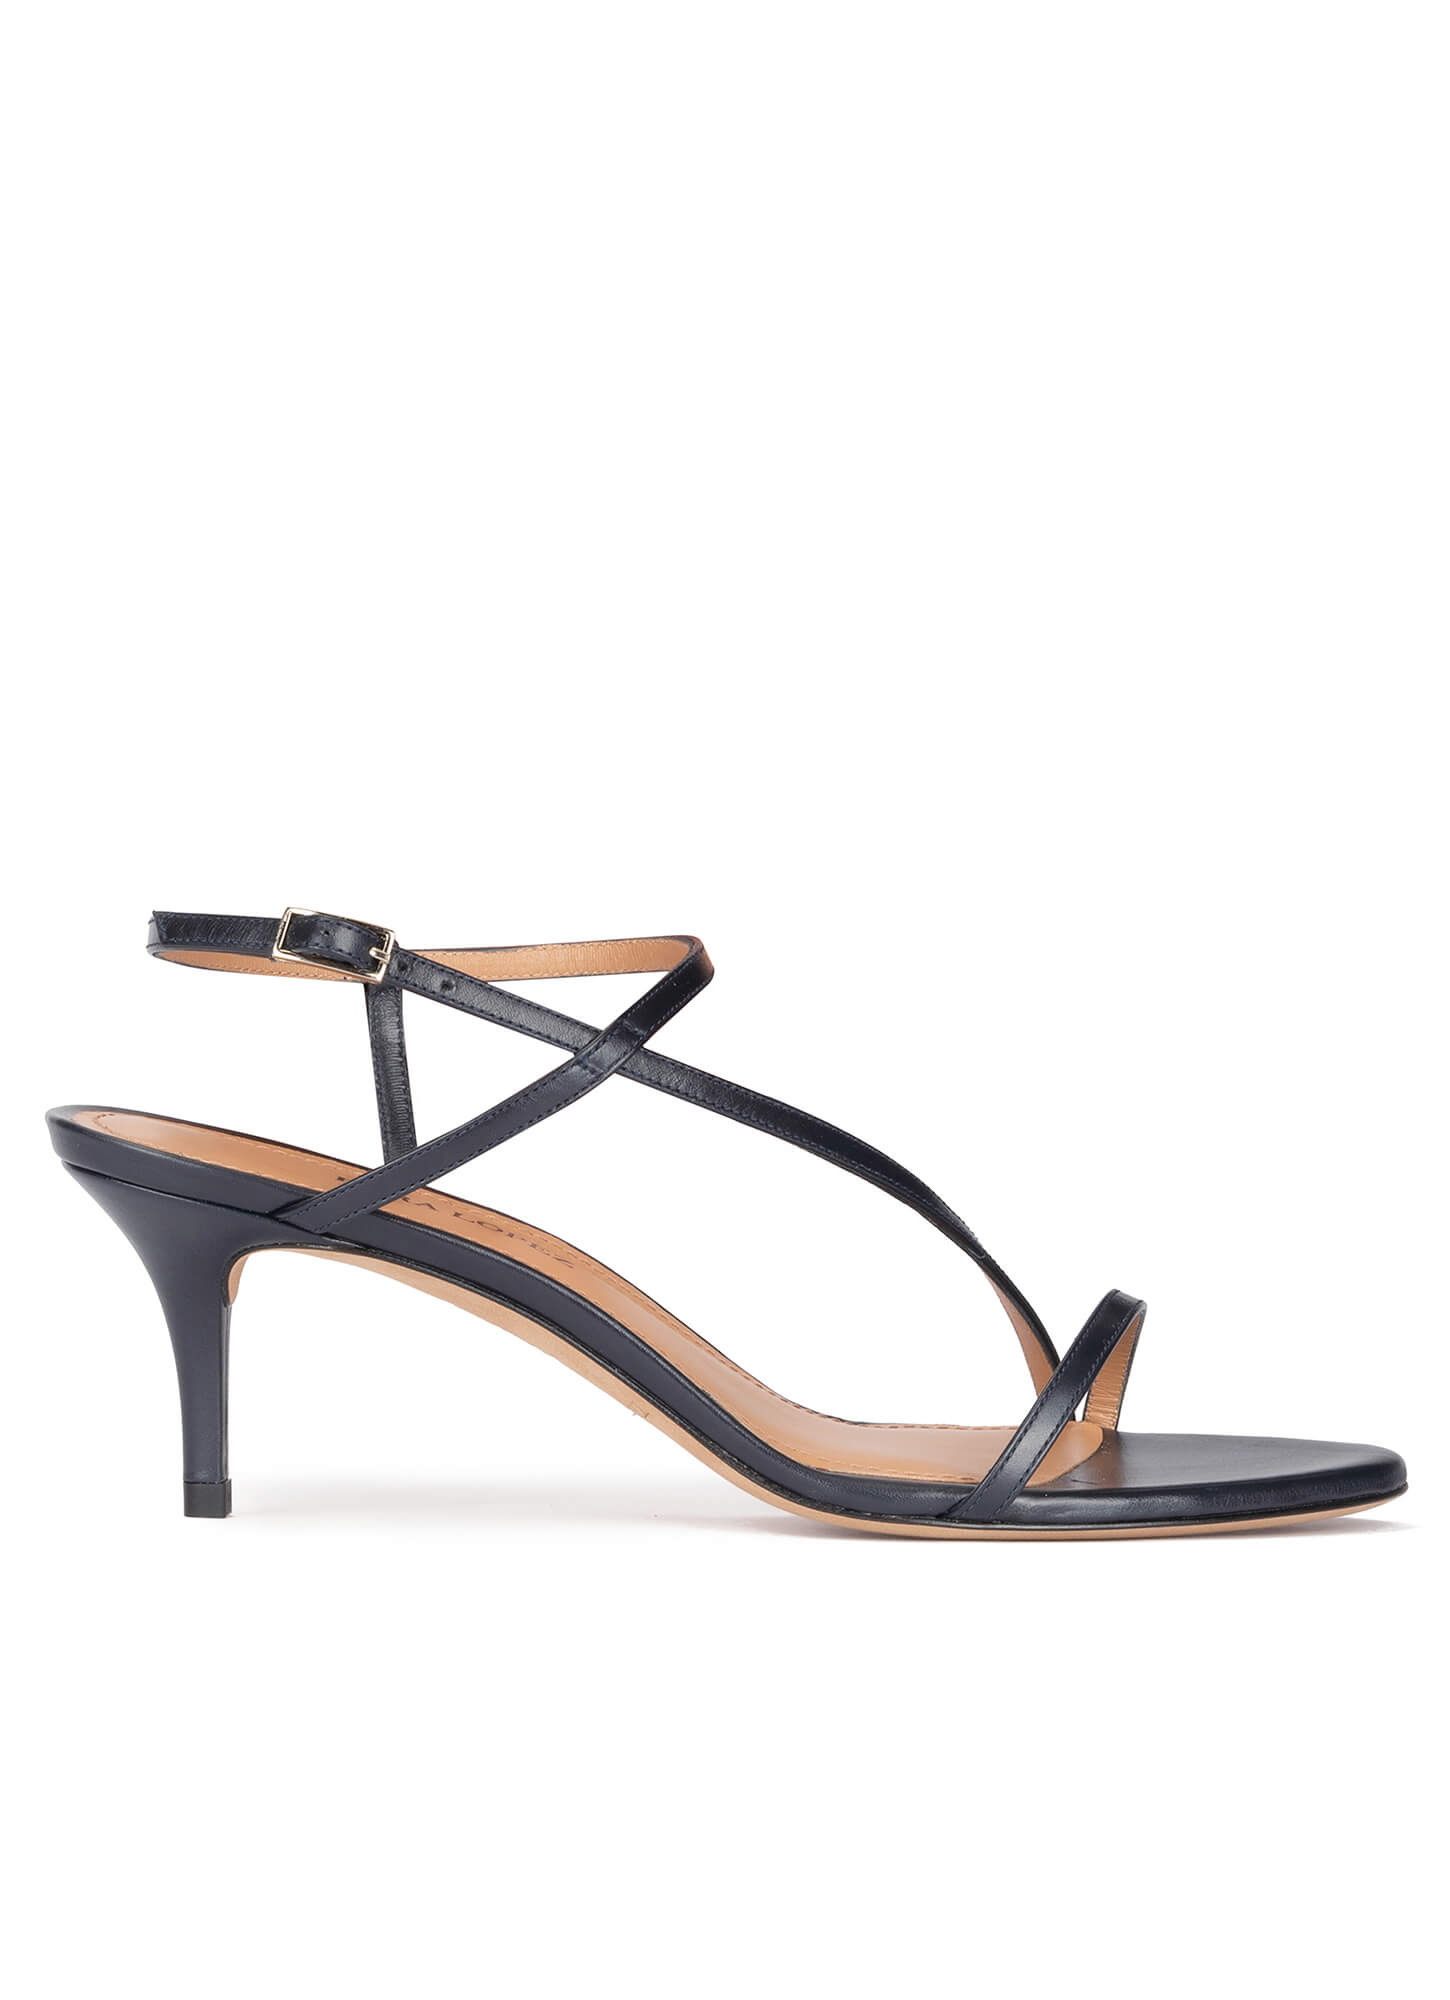 Strappy Mid Heel Sandals In Navy Blue Leather Pura Lopez